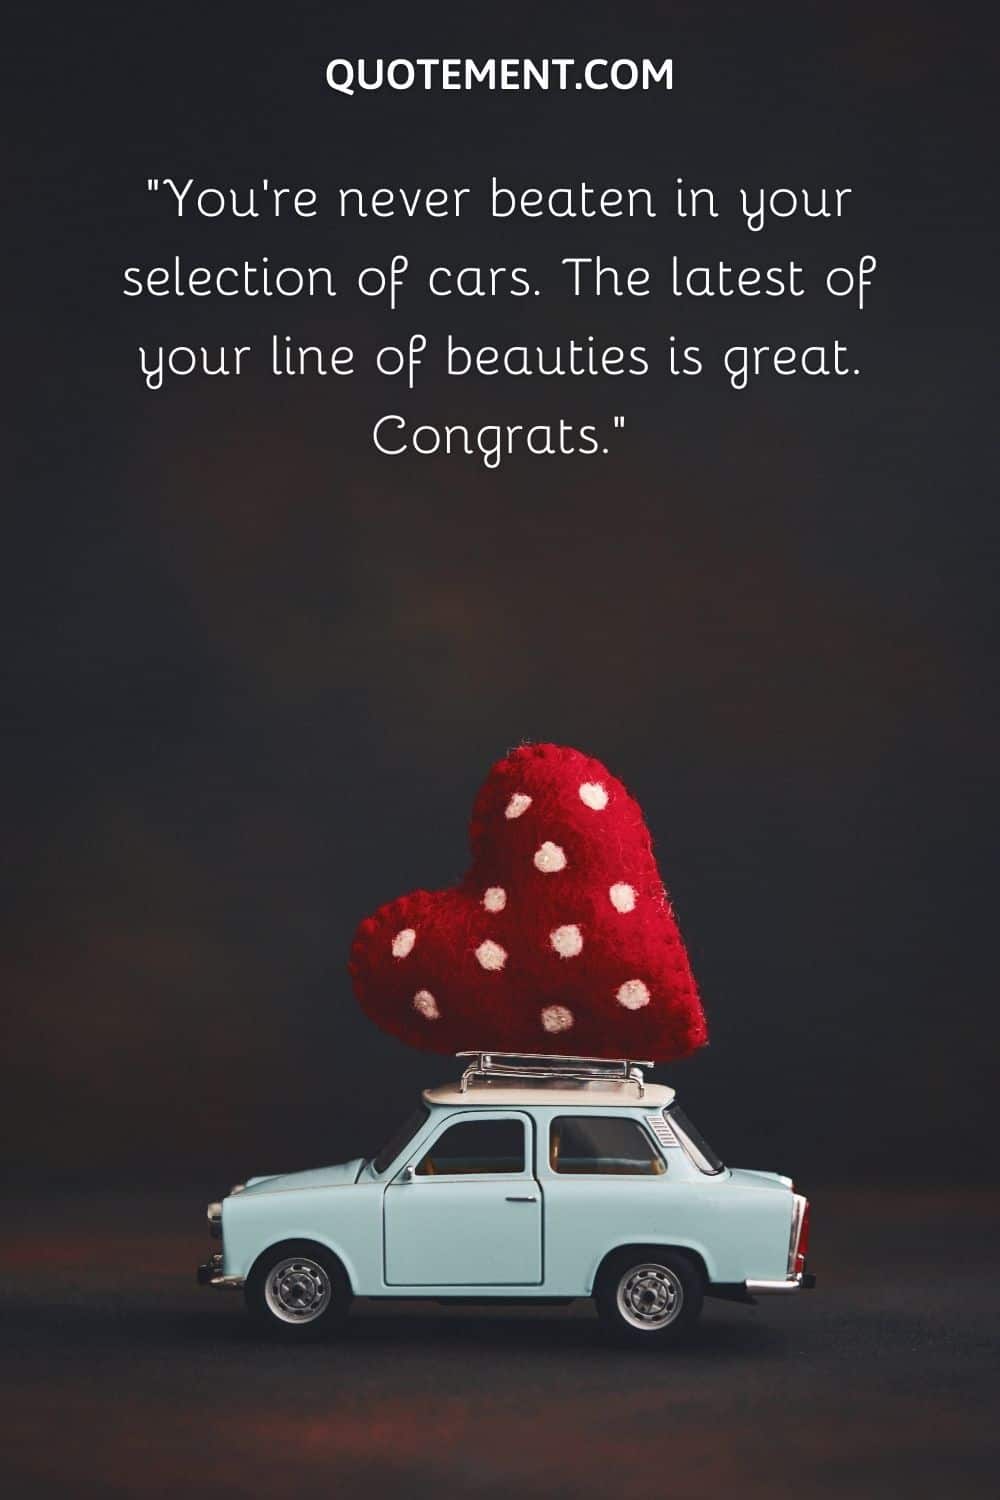 You’re never beaten in your selection of cars